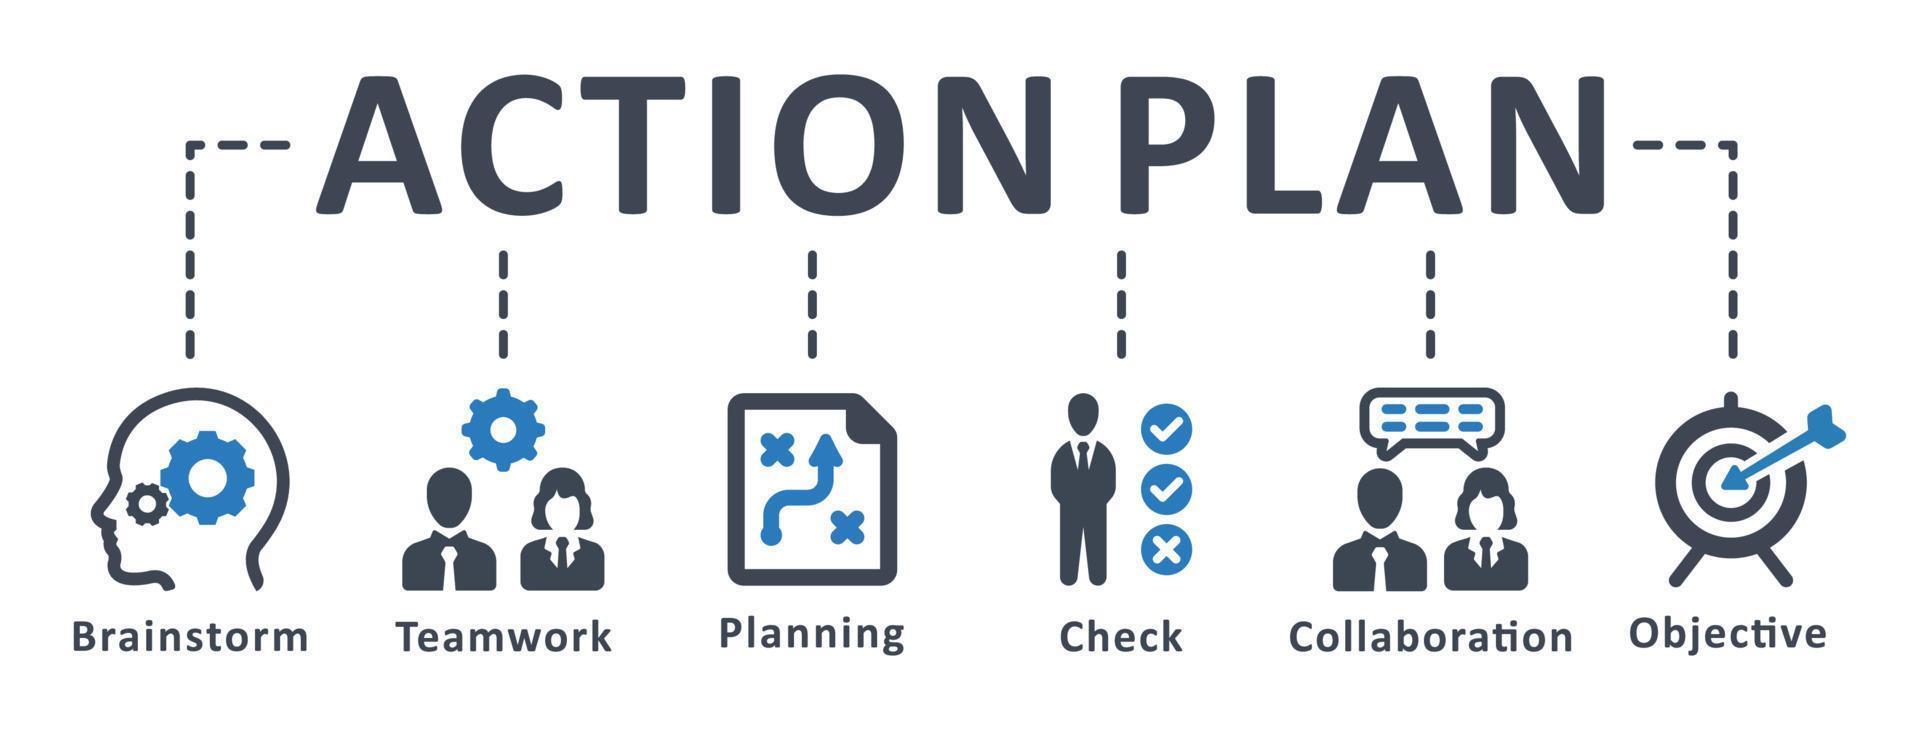 Action Plan icon - vector illustration . planning, strategy, plan, development, teamwork, business, infographic, template, presentation, concept, banner, pictogram, icon set, icons .